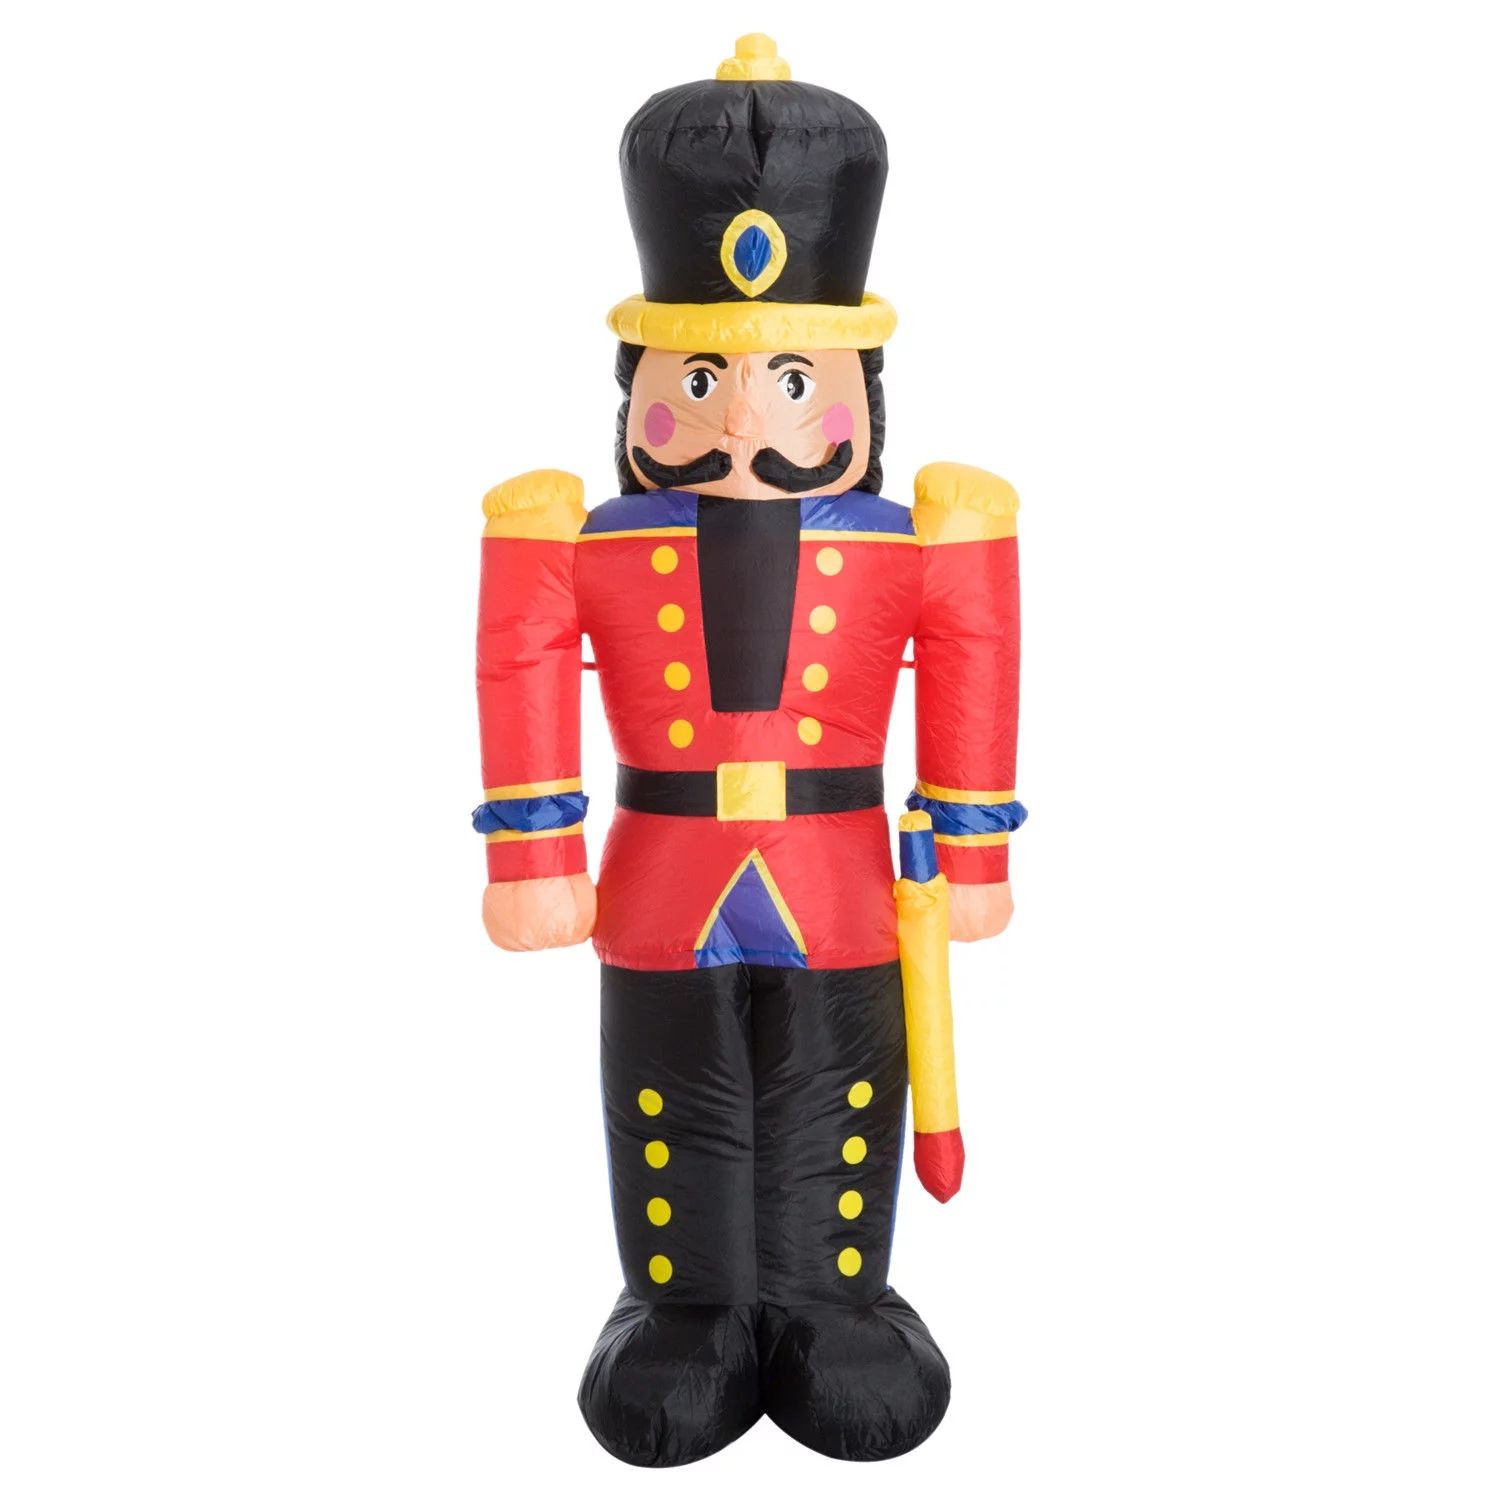 HOMCOM Inflatable Christmas Outdoor Lighted Yard Decoration, Nutracker Toy Soldier, 6' Tall | Walmart (US)